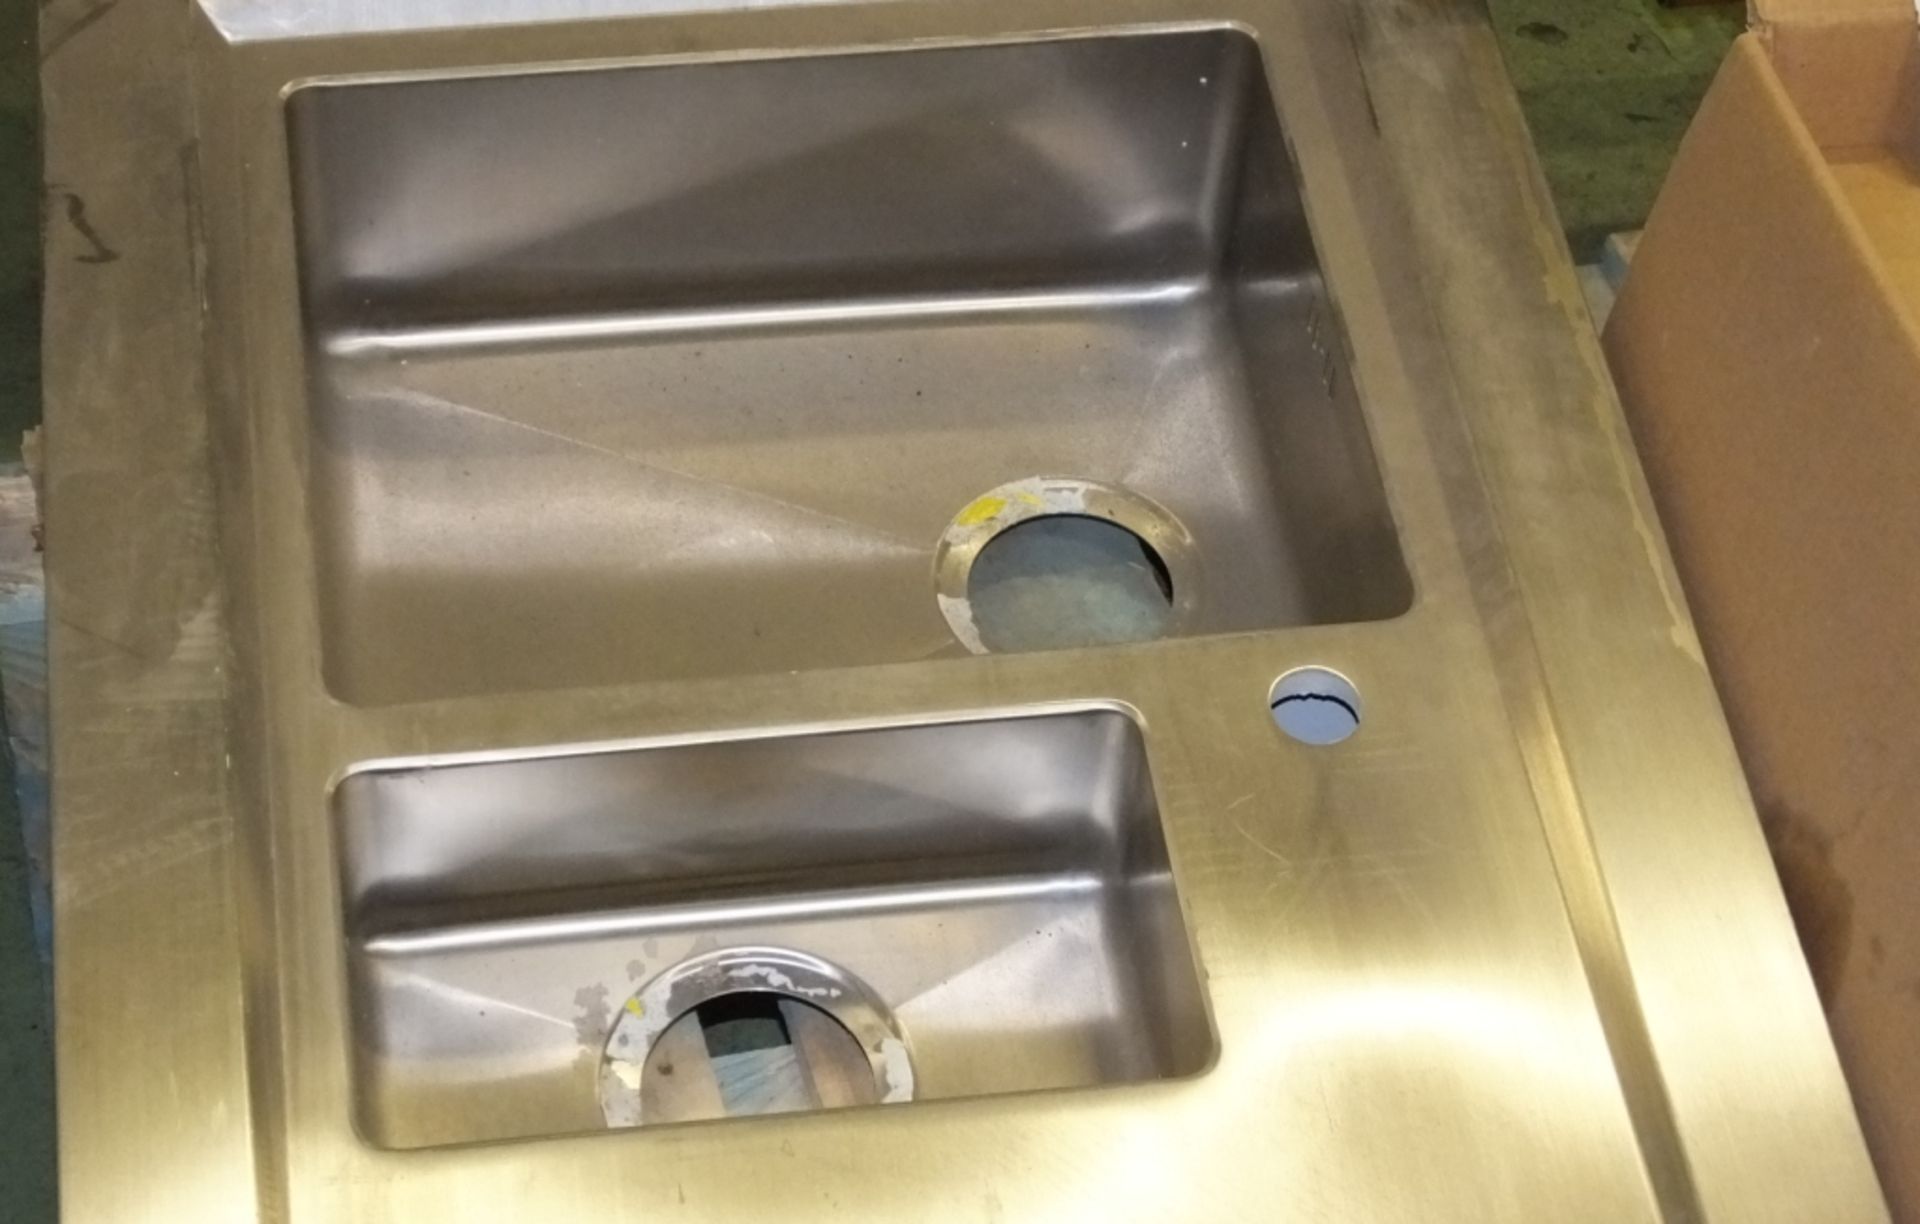 Stainless sink unit with centre drainer - 1000 x 620 - Image 2 of 2